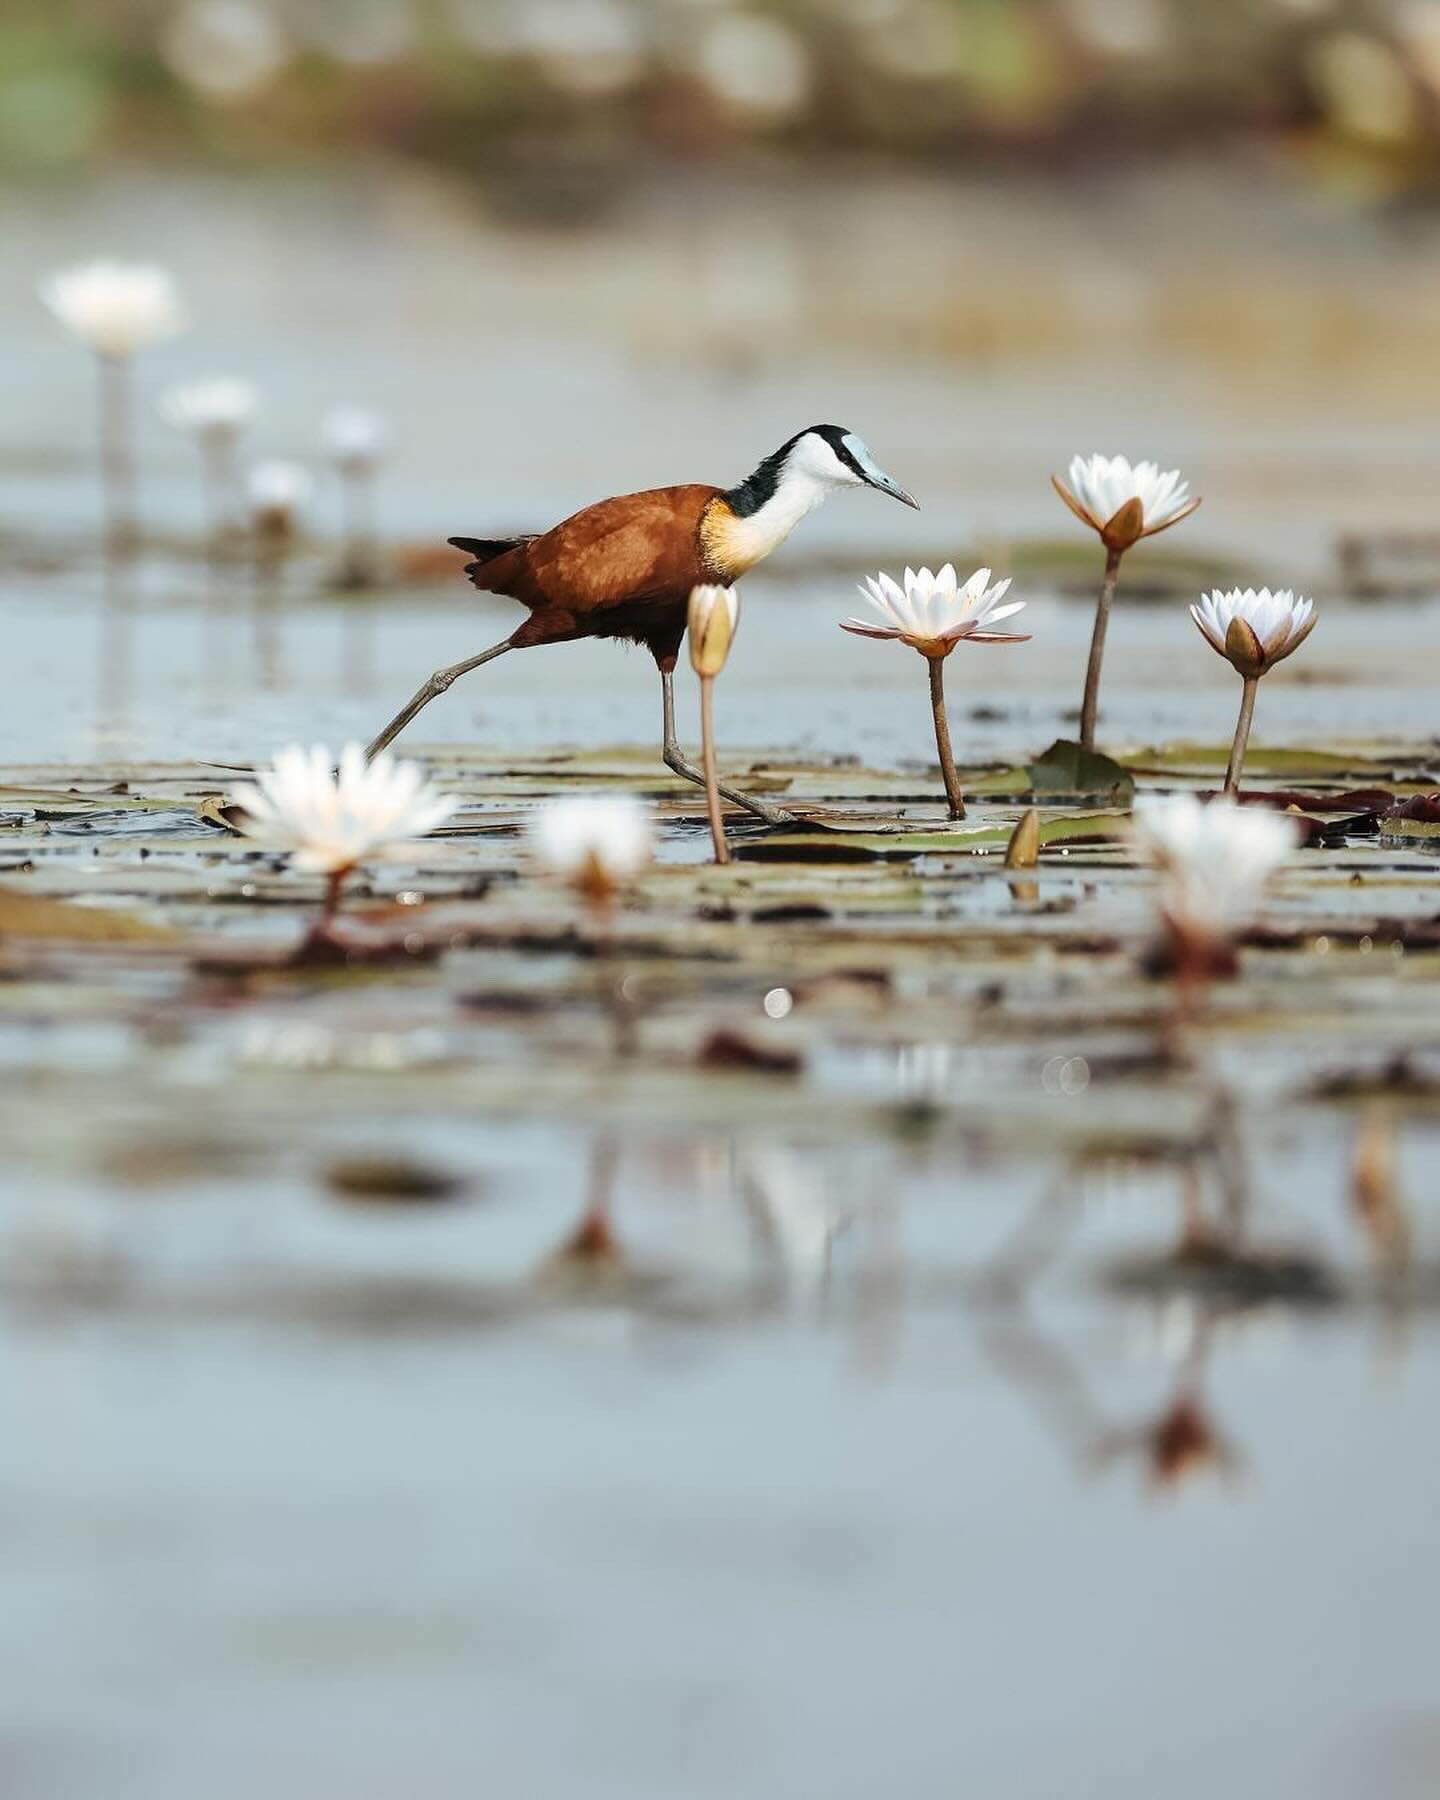 An African jacana wades over water lillies in the Chobe National Park, Botswana 🌱 

A fascinating fact about the African jacana is its remarkable breeding behavior. These birds are known for their polyandrous mating system, where one female mates wi